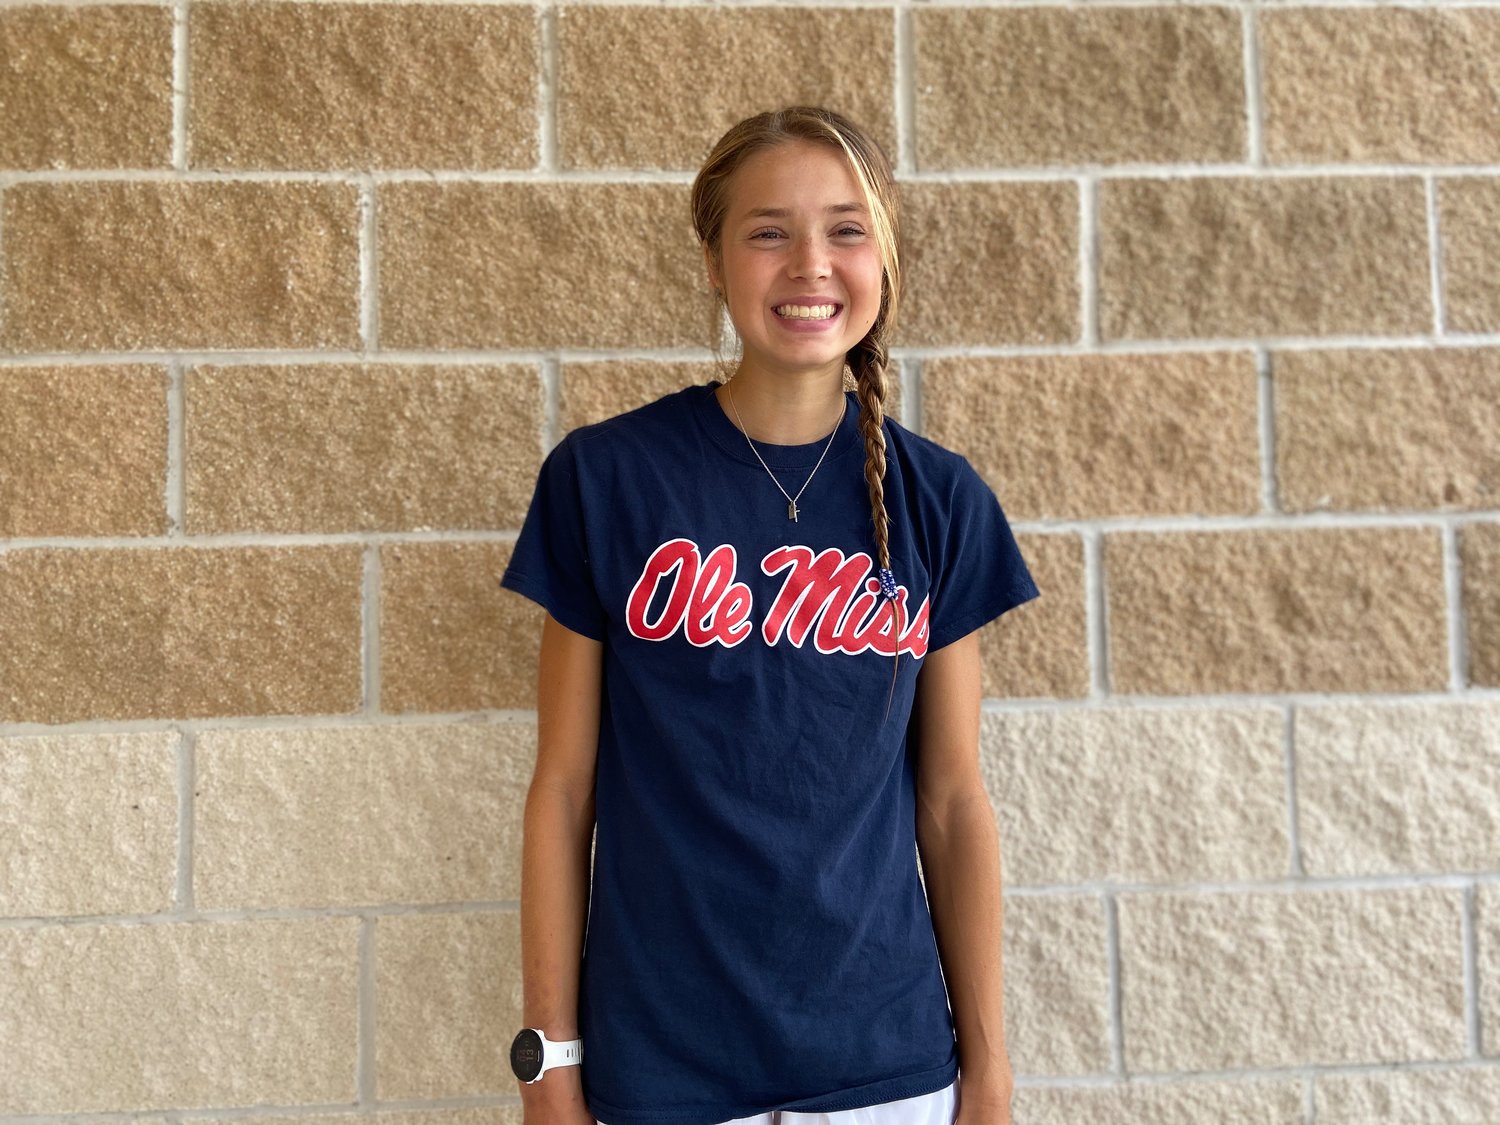 Tompkins senior Addison Stevenson has verbally committed to run cross country and track and field at Ole Miss.